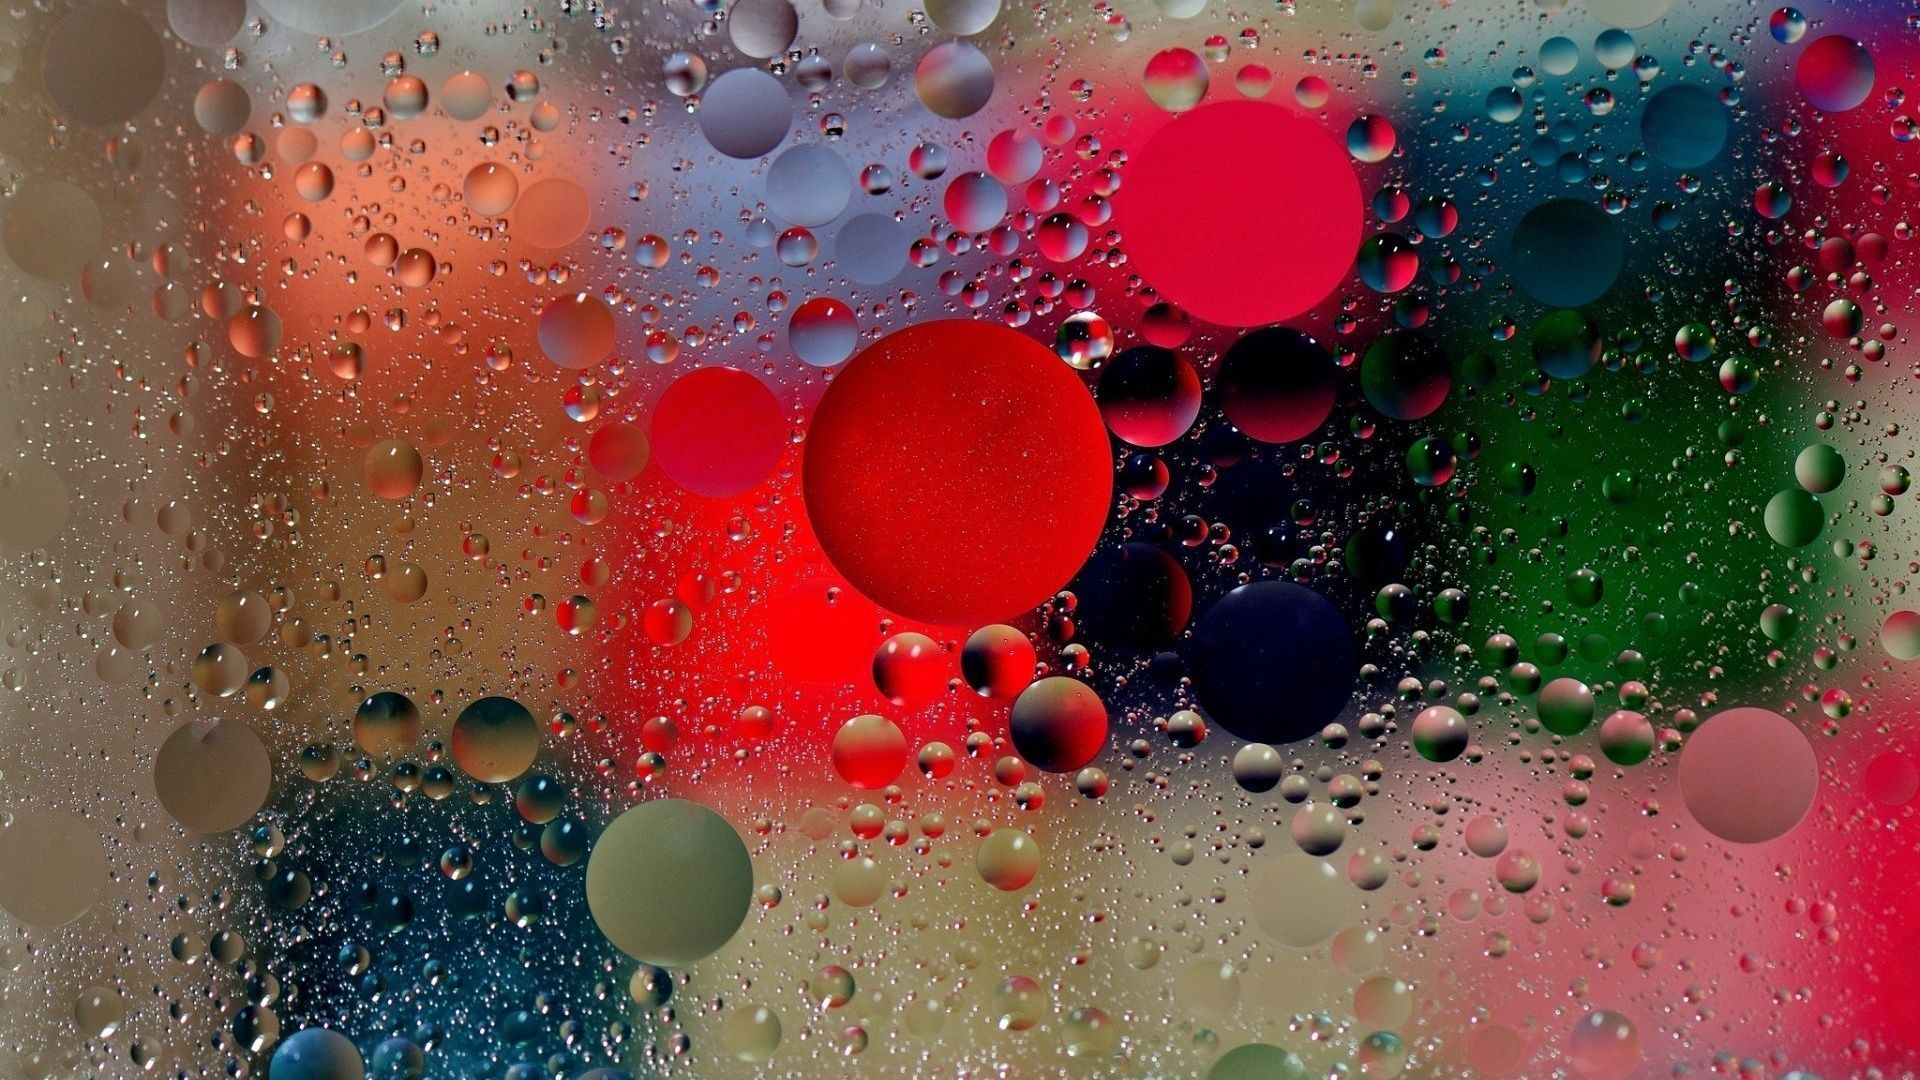 Colorful-Water-Drops-on-Glass-Wallpaper.jpg